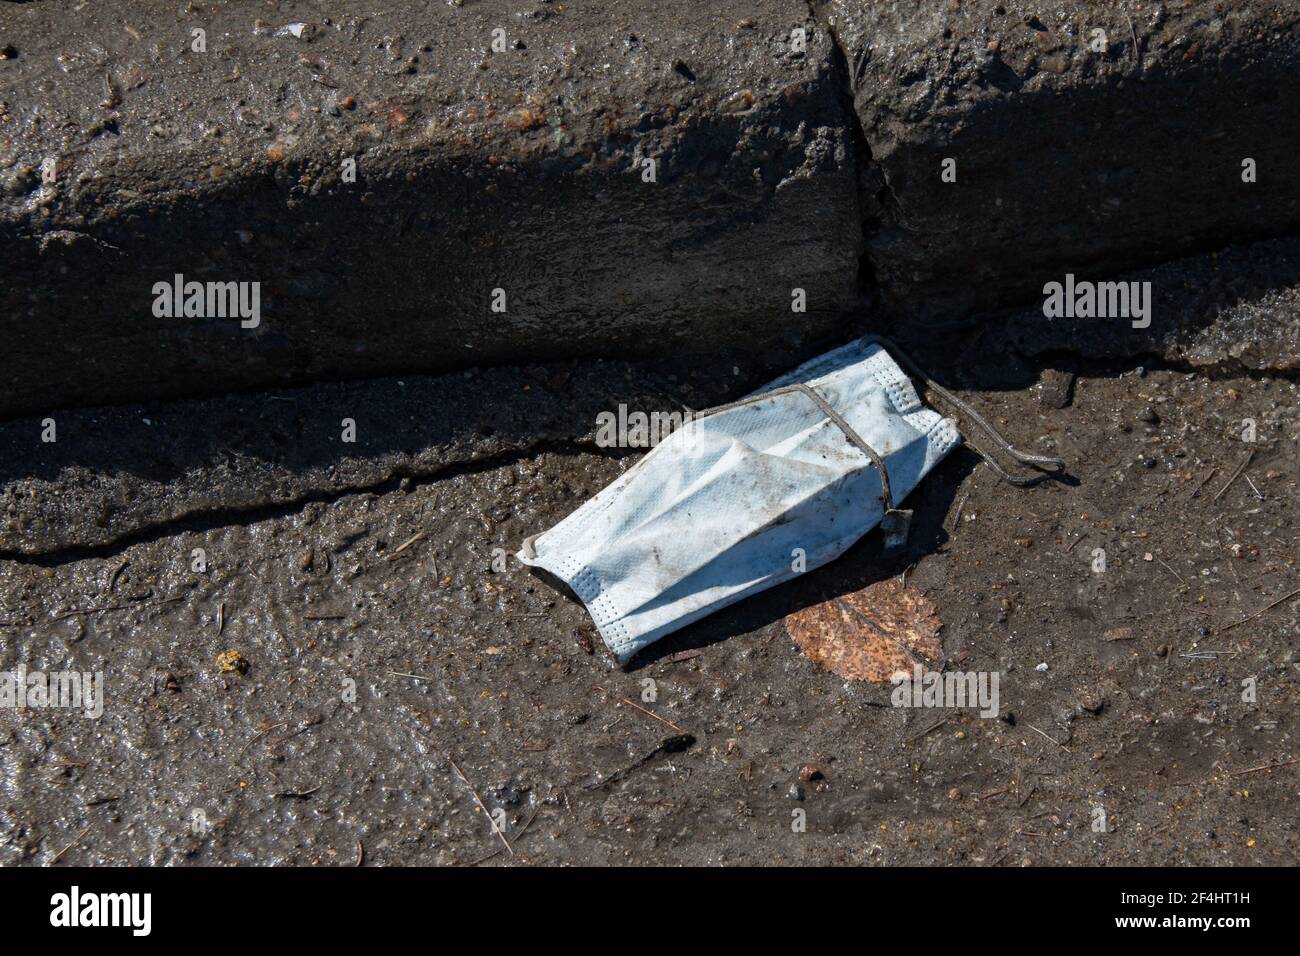 A used disposable face mast discarded in the gutter. Stock Photo